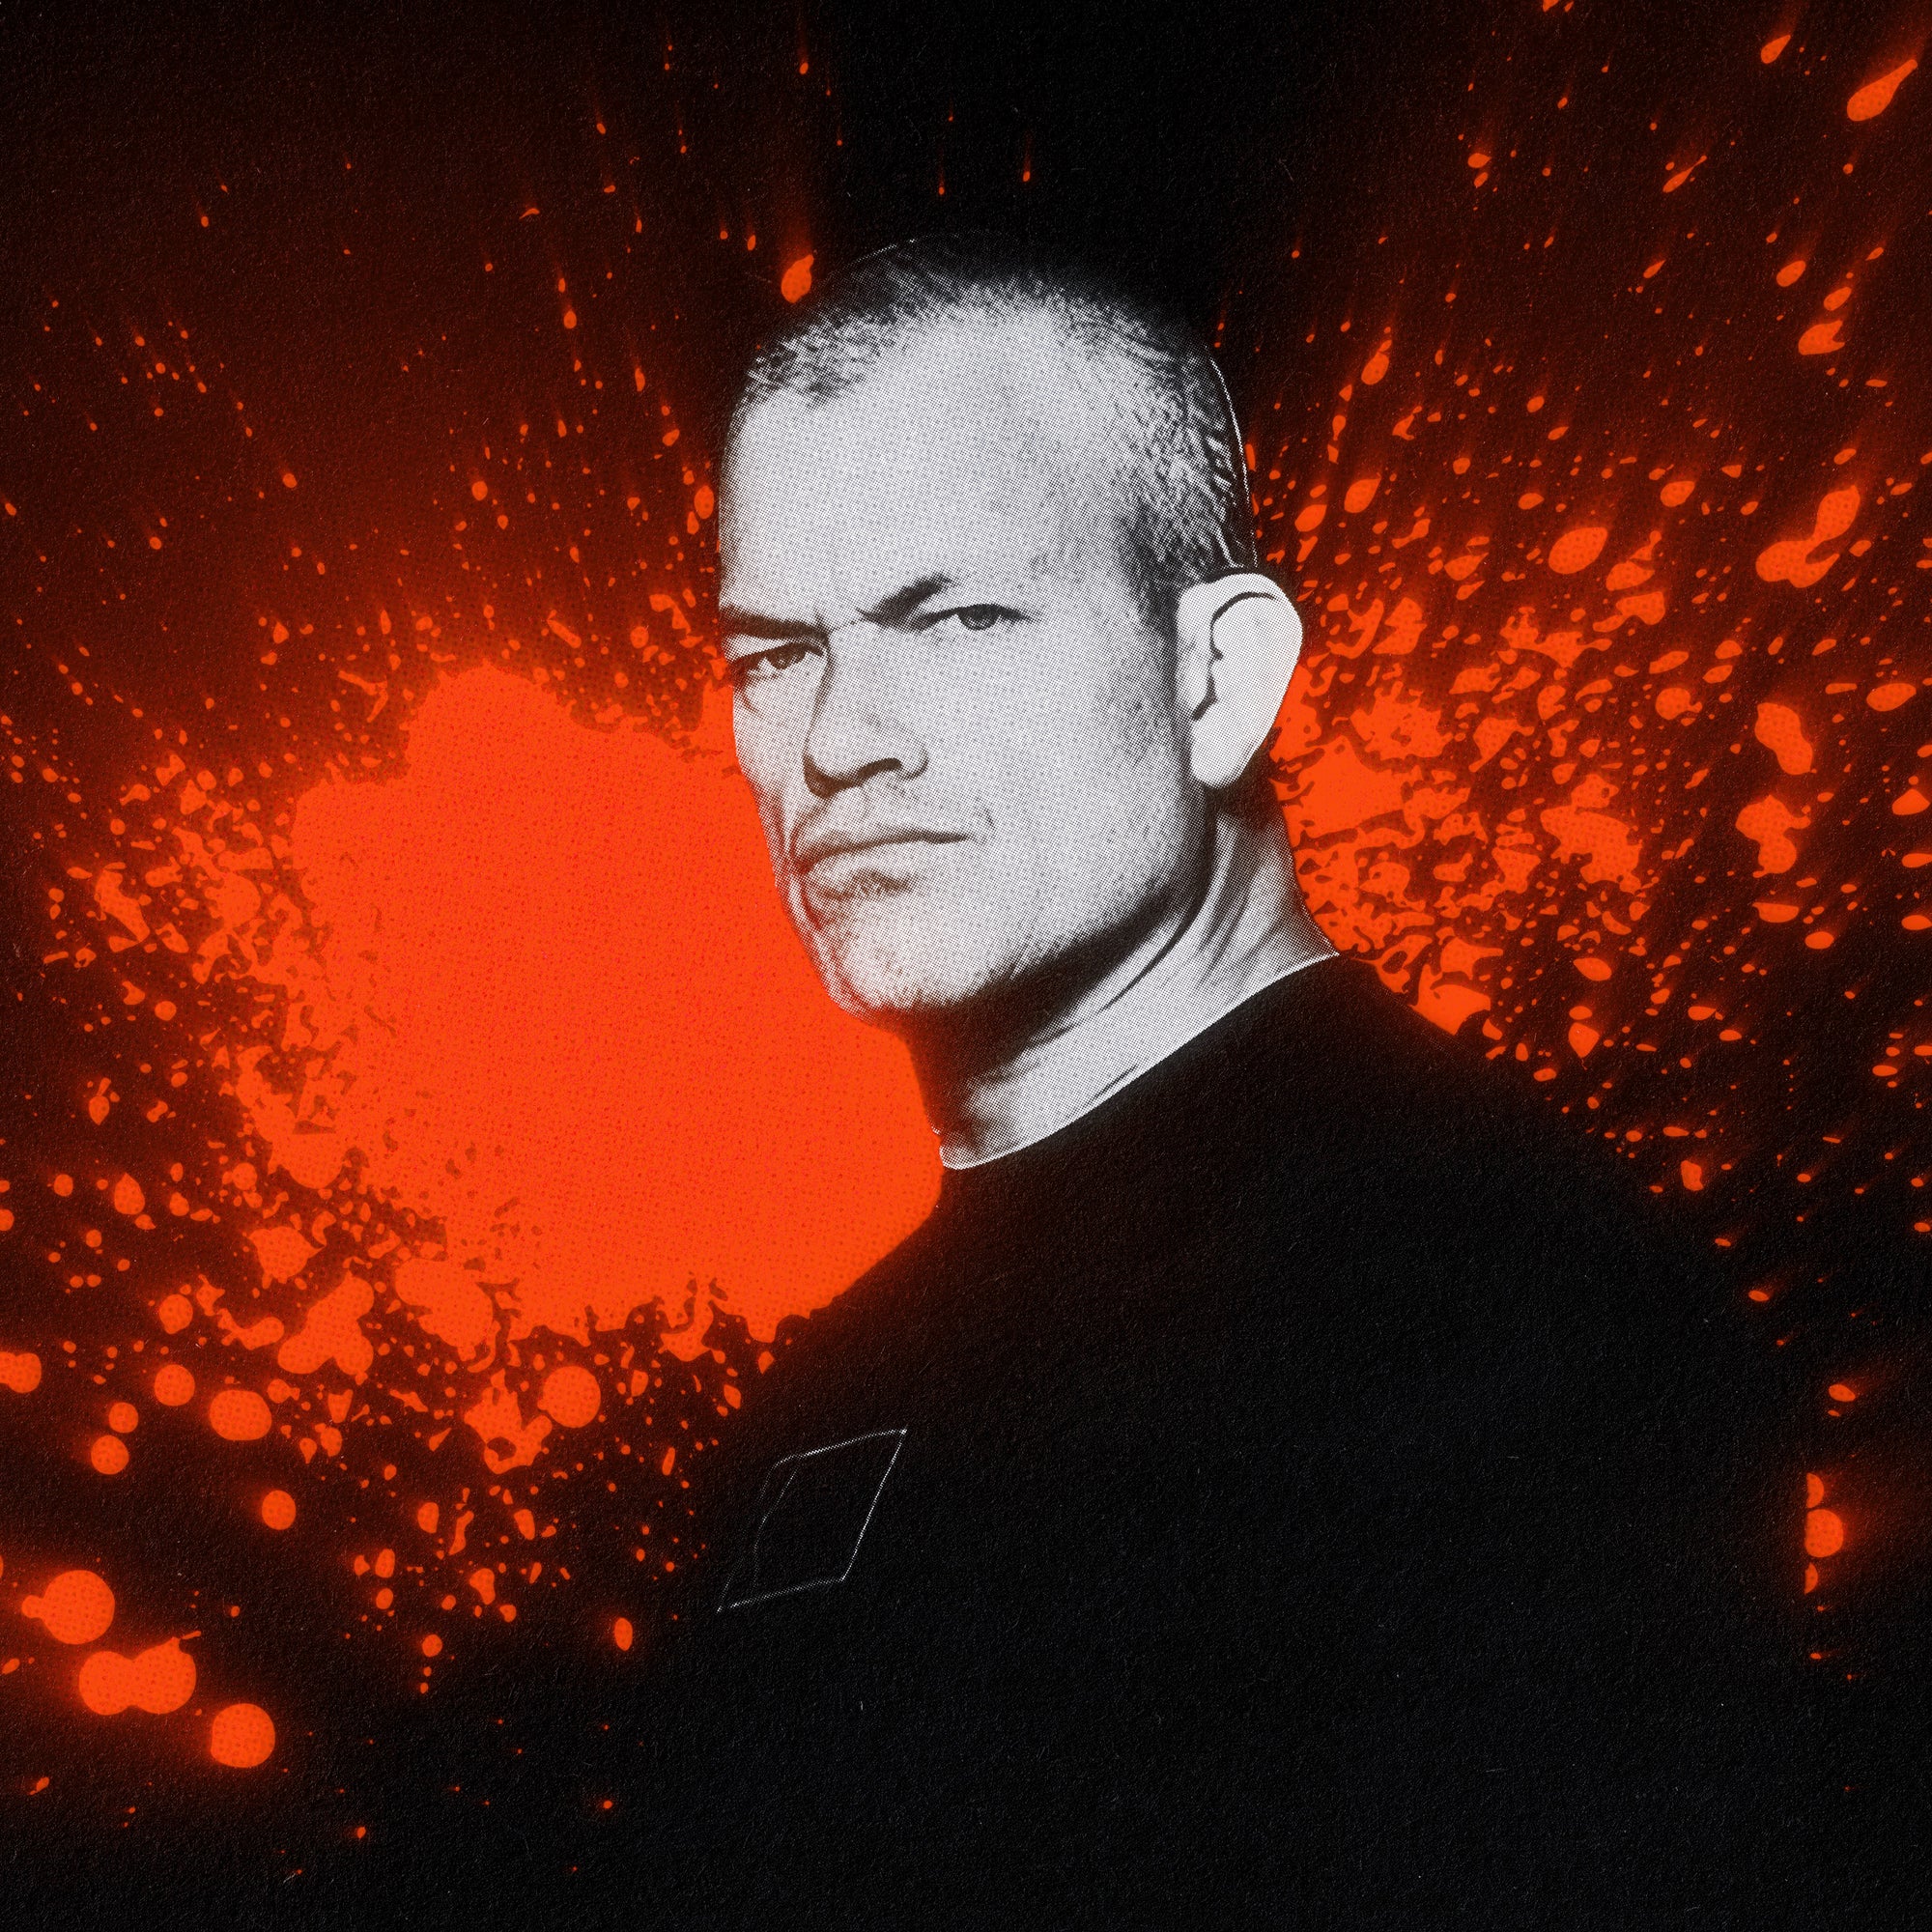 ONE SHOT ft. Jocko Willink | Single | This Week In Meaningwave Aug 26 2022